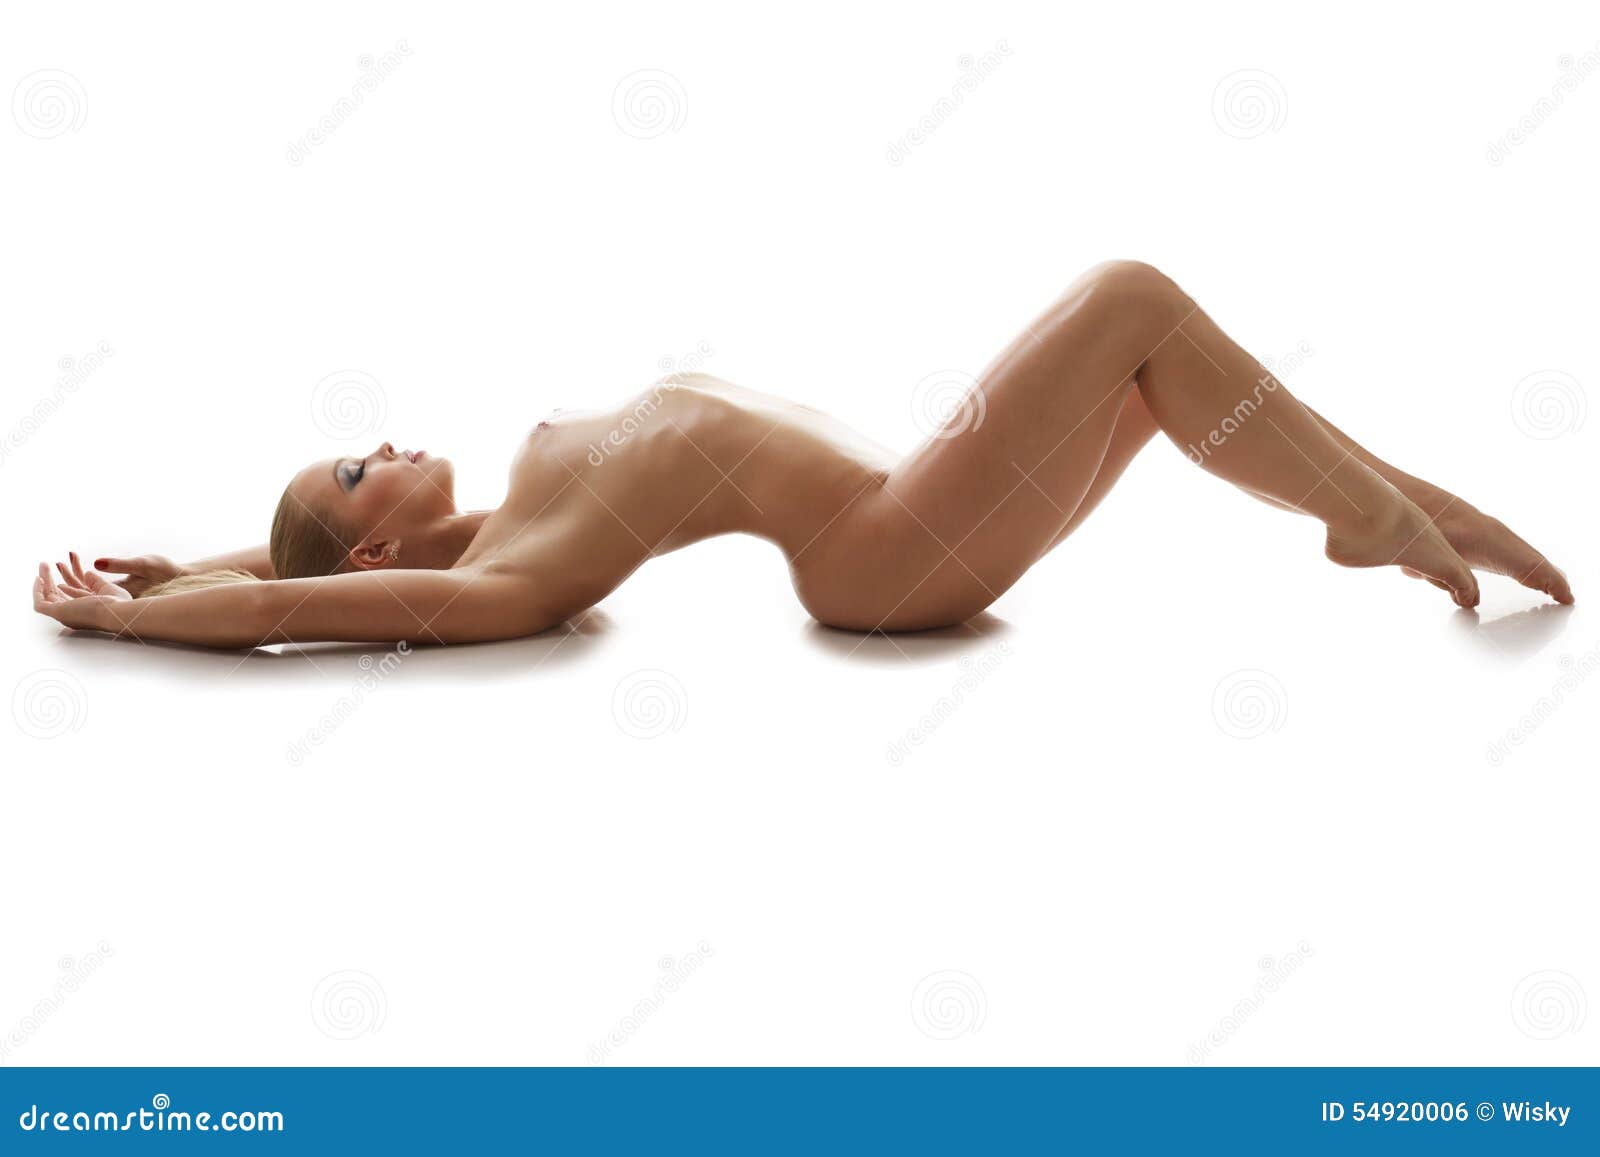 Nude Woman Lying On Back le perreux